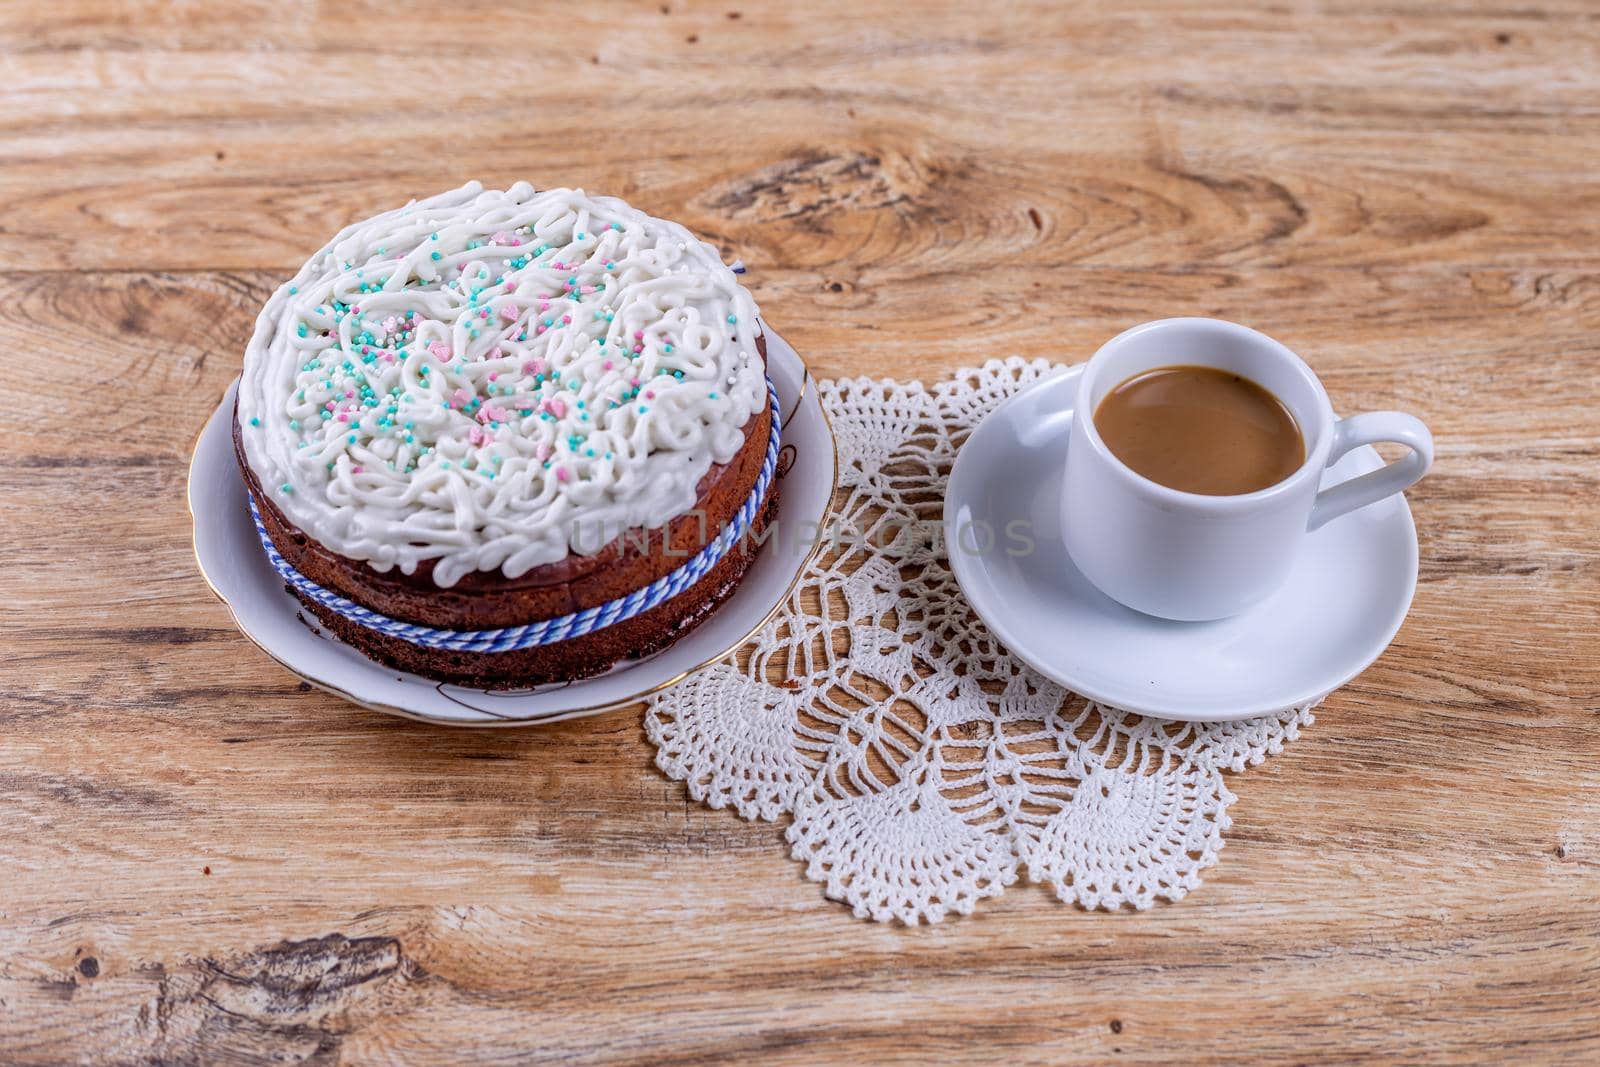 Homemade cake, decorated with white icing with decorative sprinkles and coffee by galinasharapova